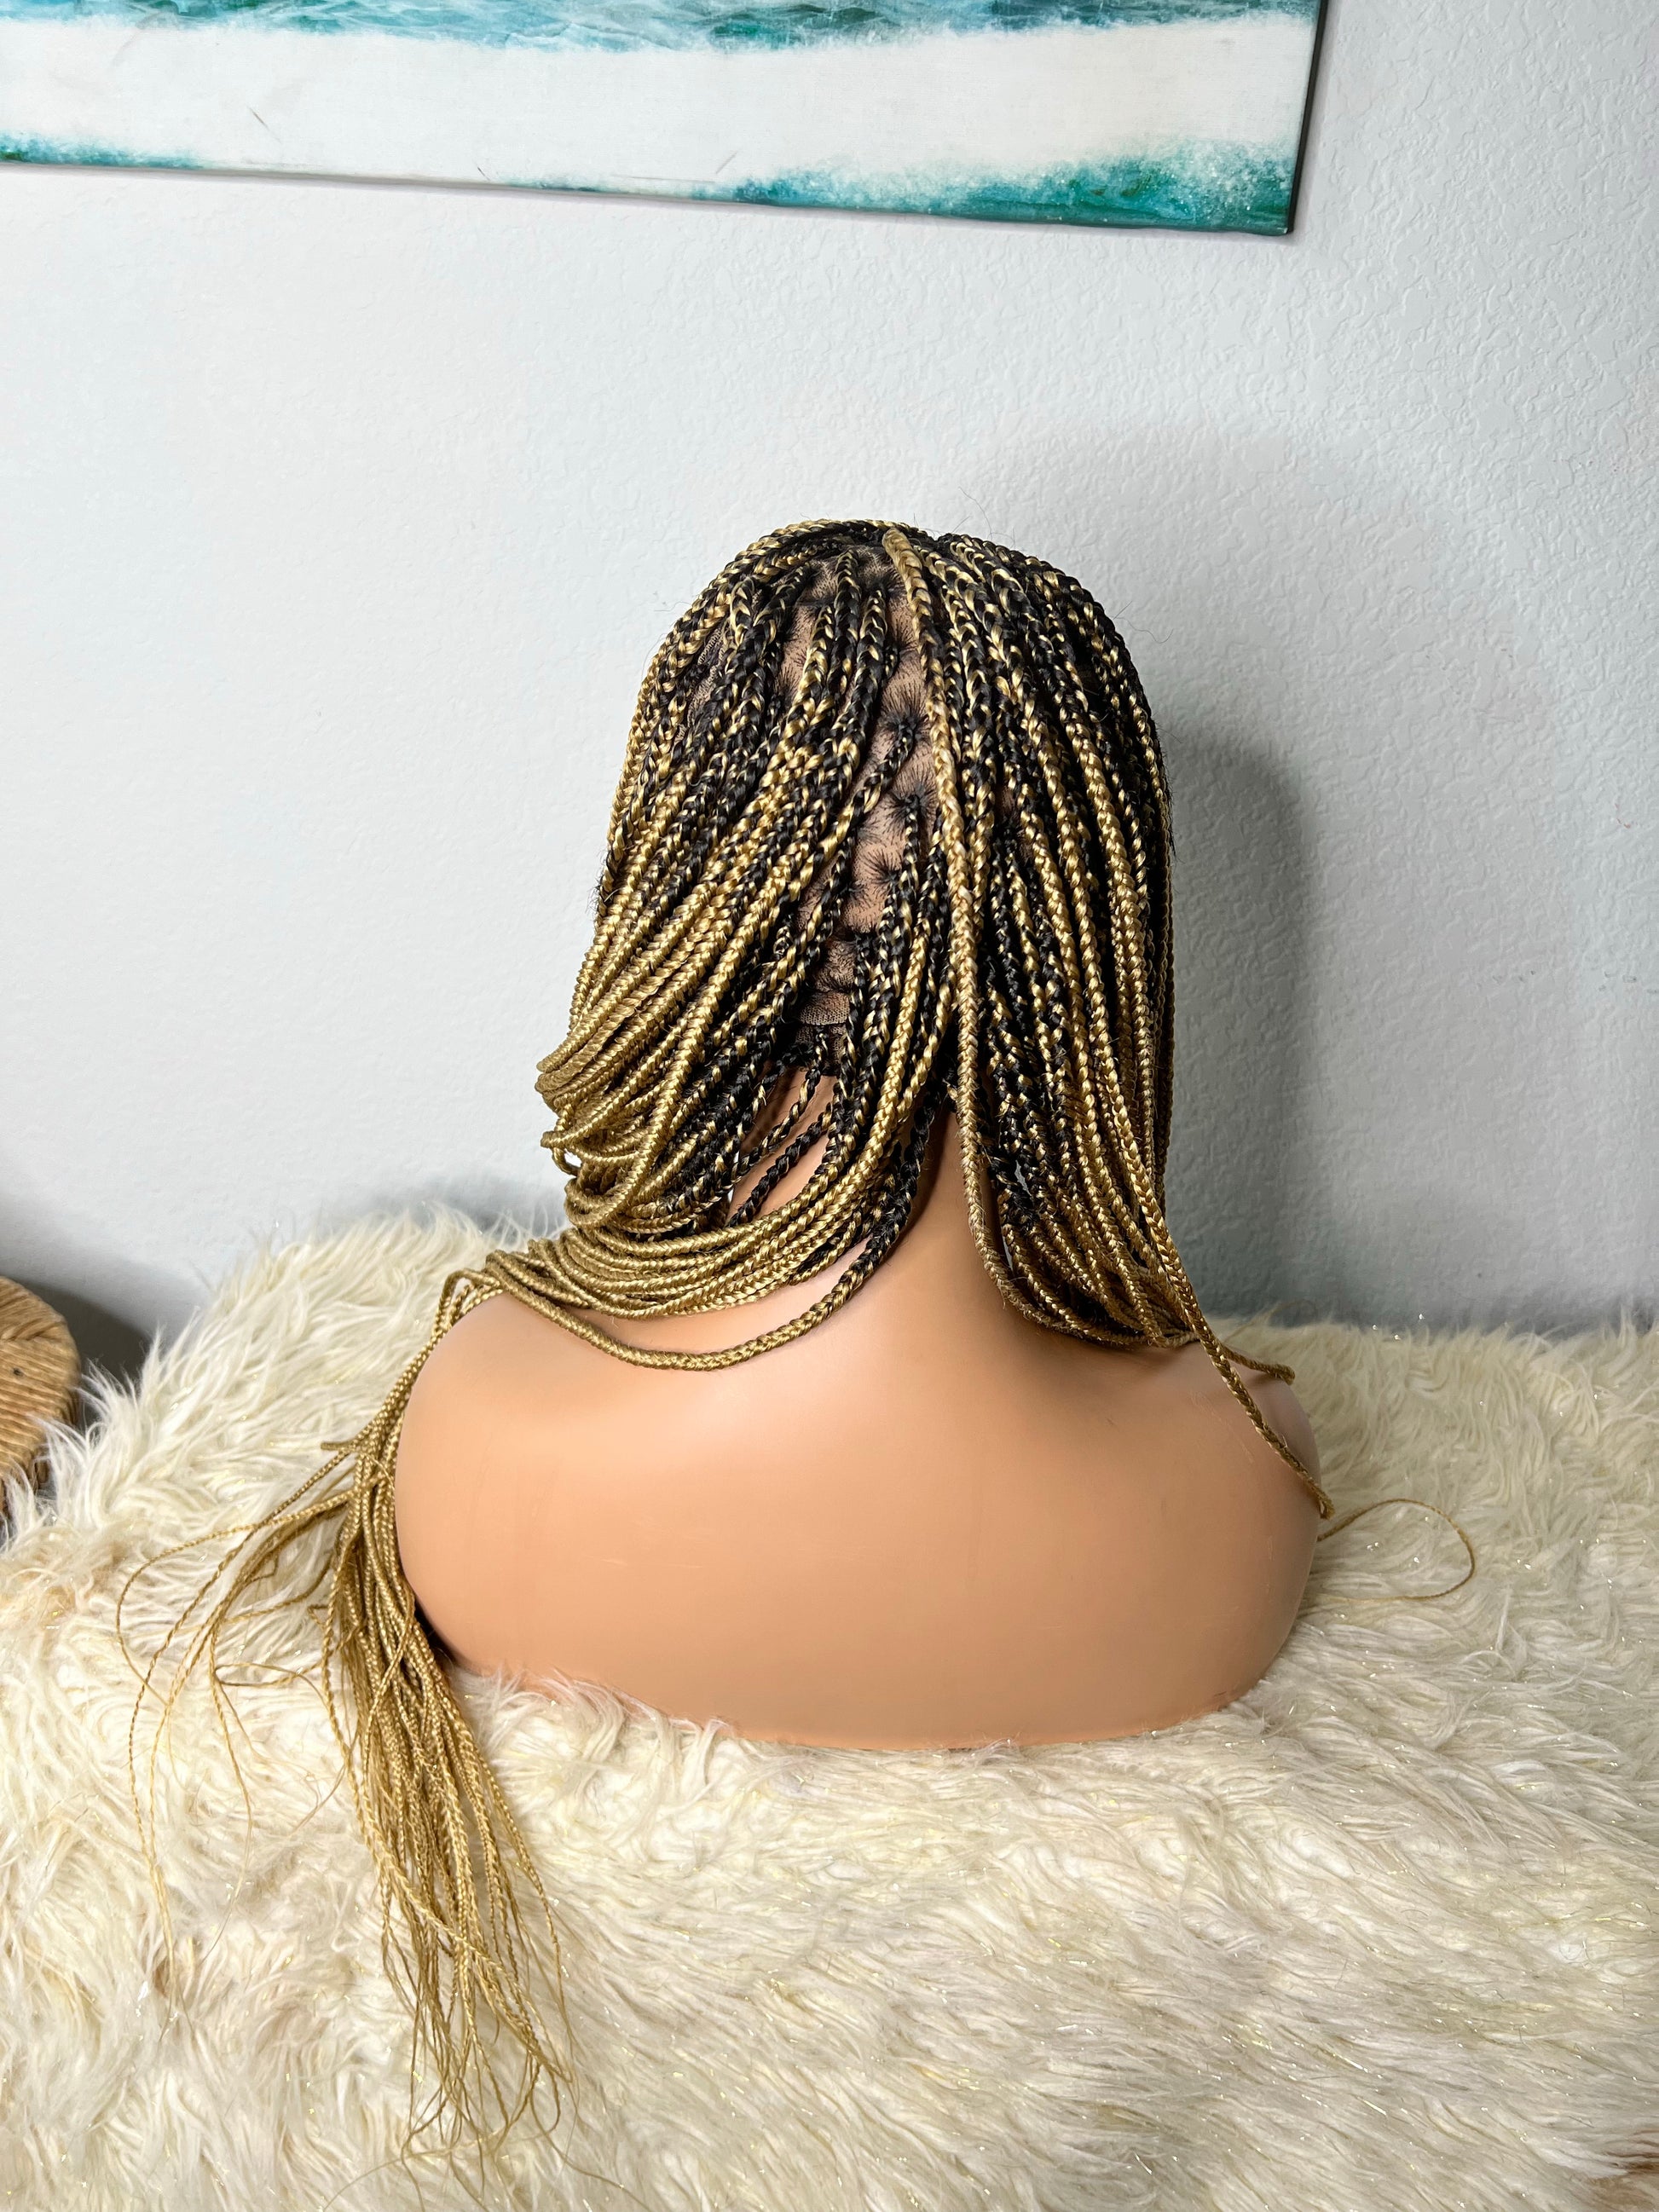 Knotless small braids 613/27 mixed - sheshopperhairplace LLC